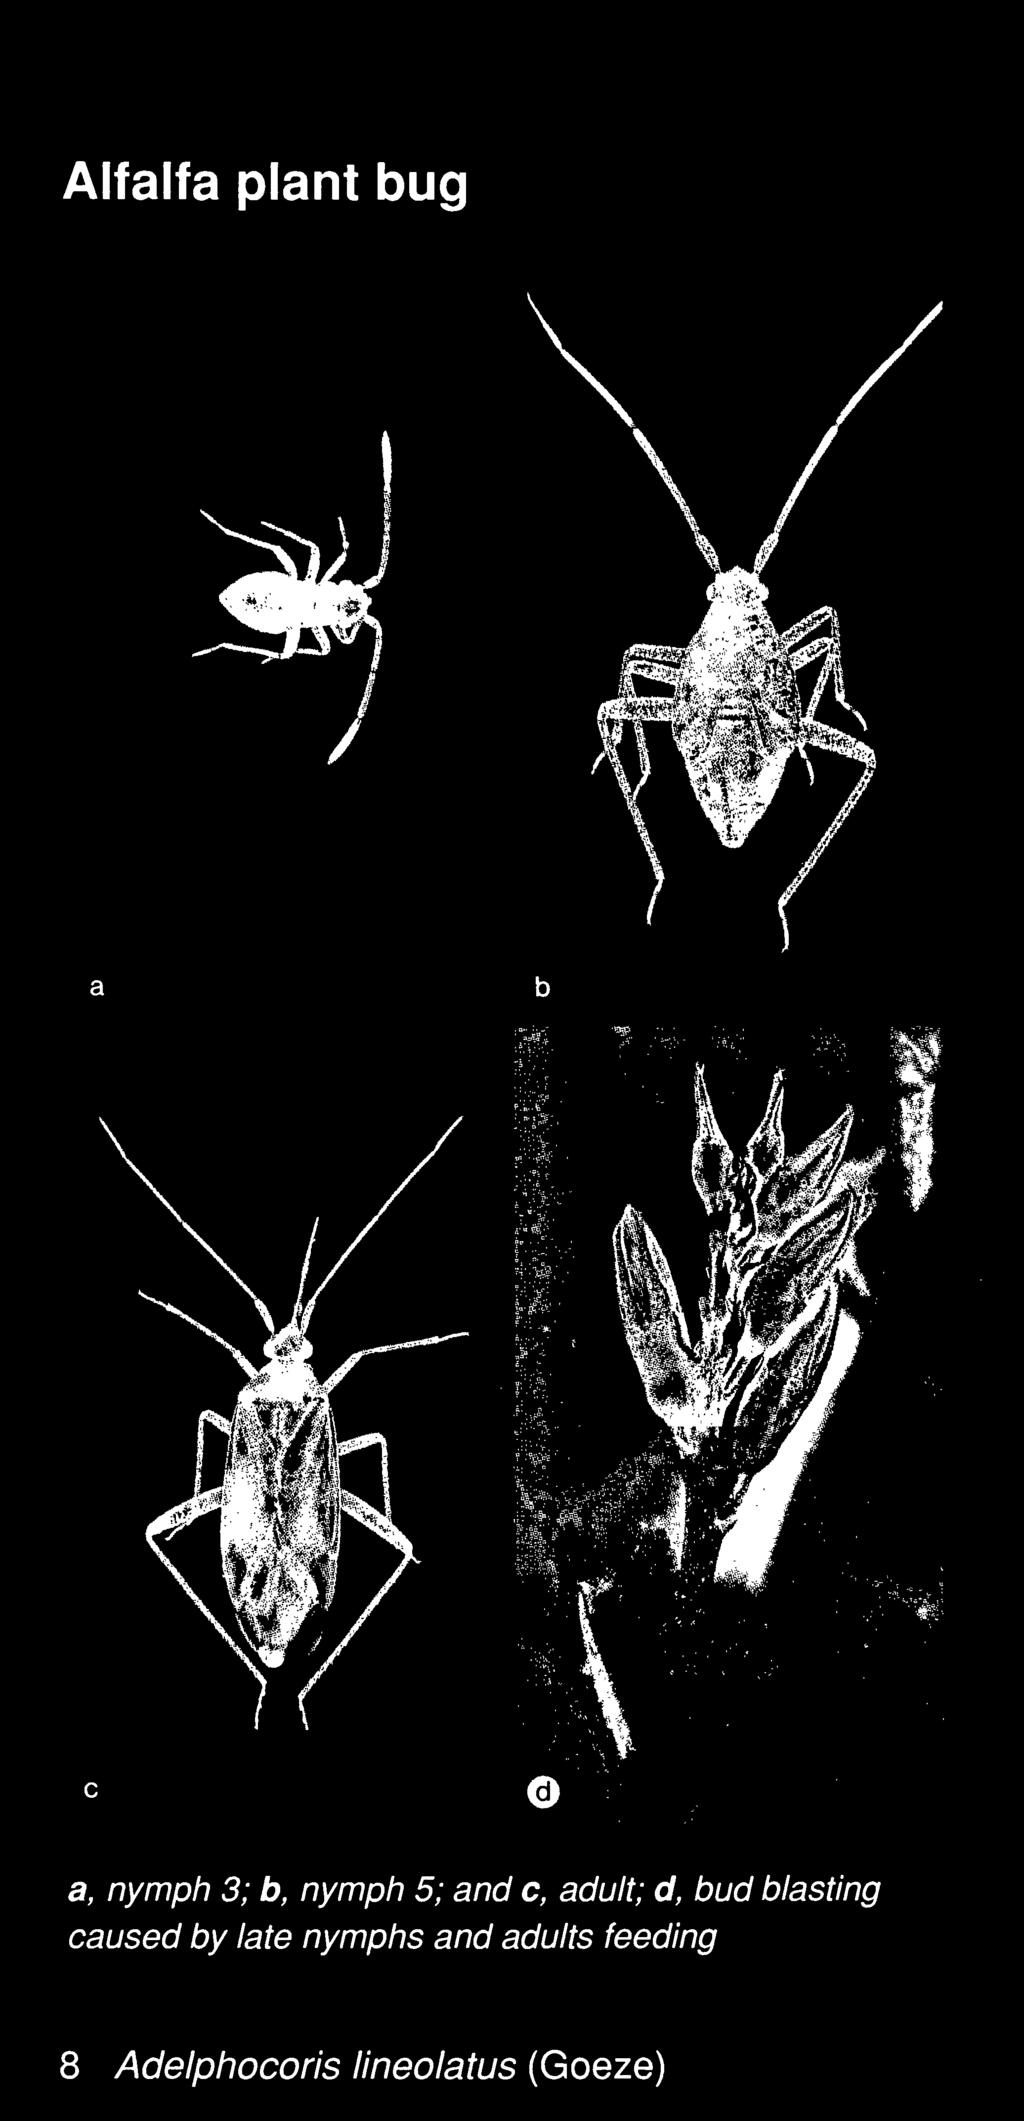 nymphs and adults